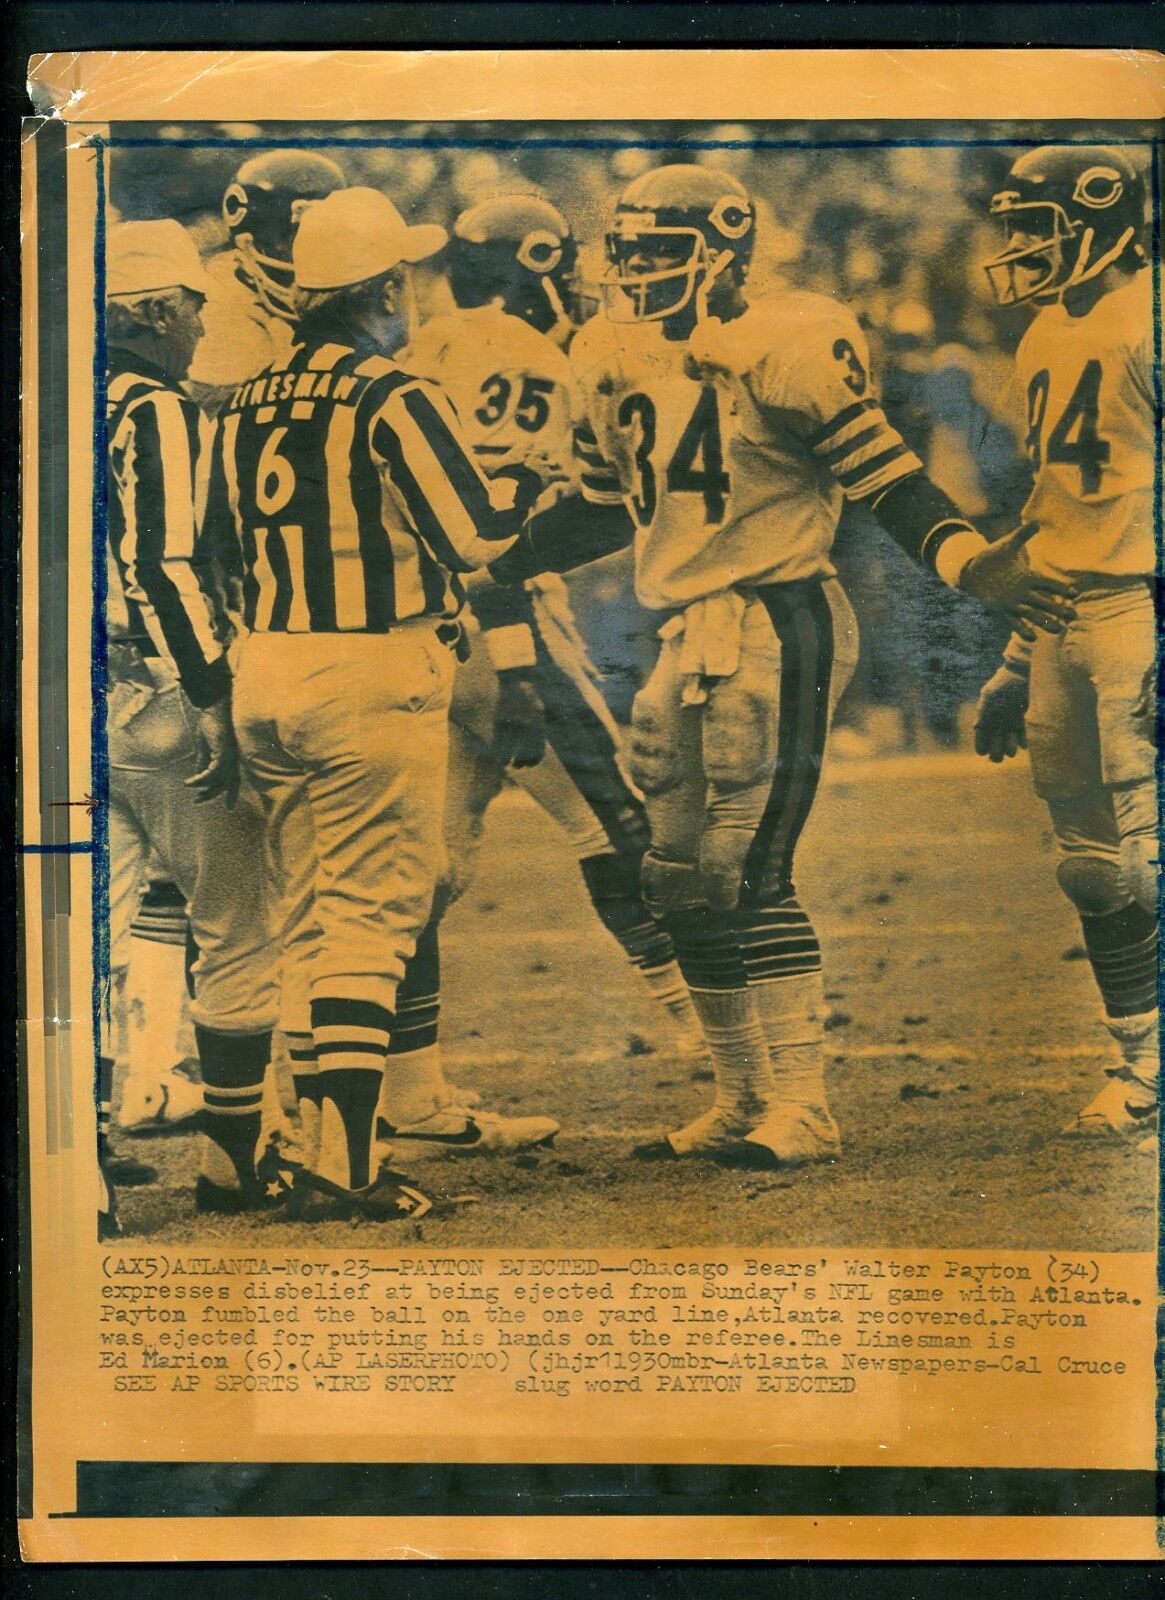 Walter Payton EJECTED from Game vs. Falcons 1980 Press Photo Poster painting Chicago Bears